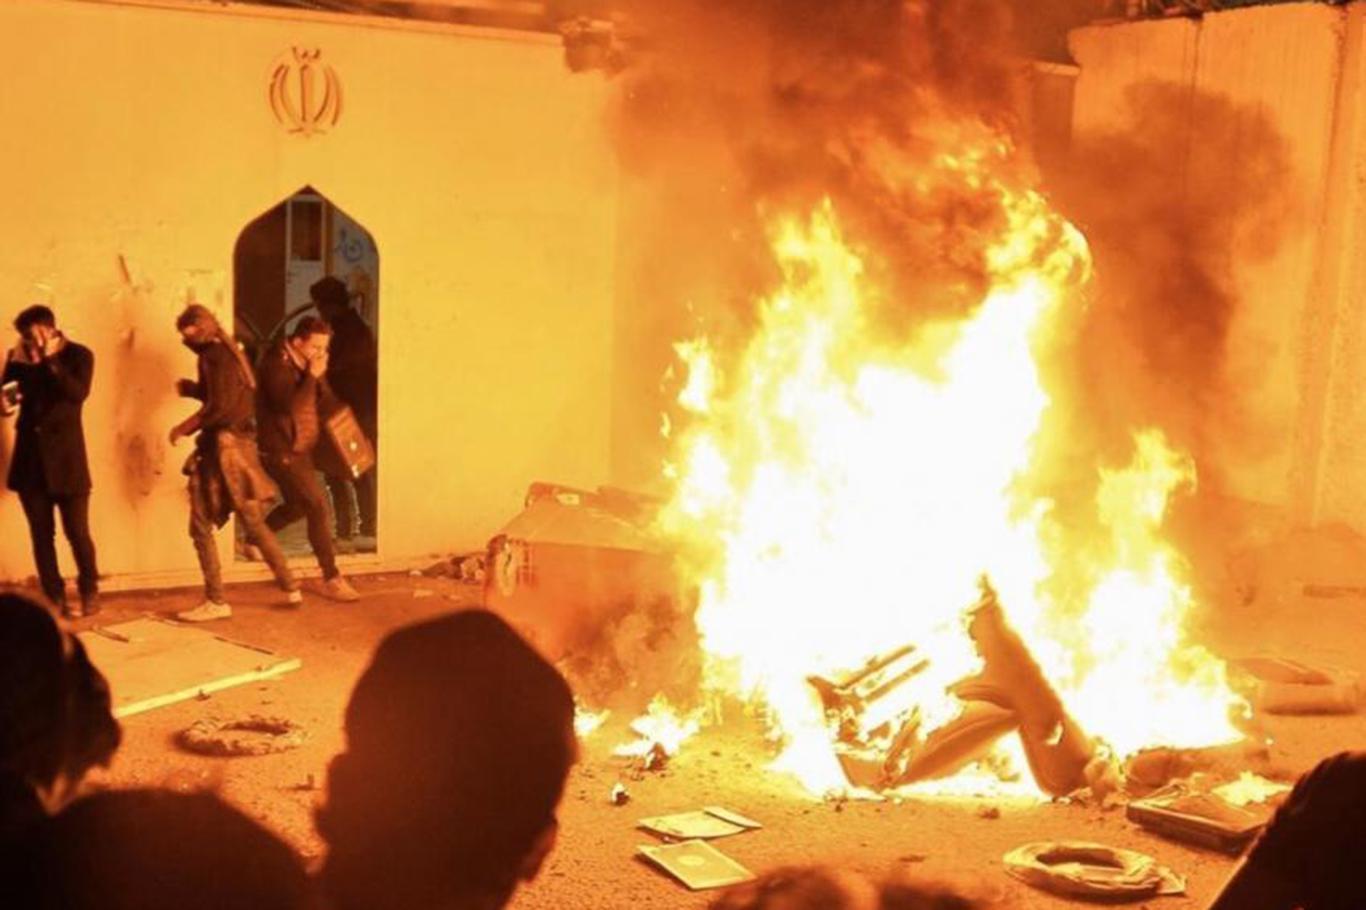 Iraqi protesters set fire to Iranian consulate in Najaf